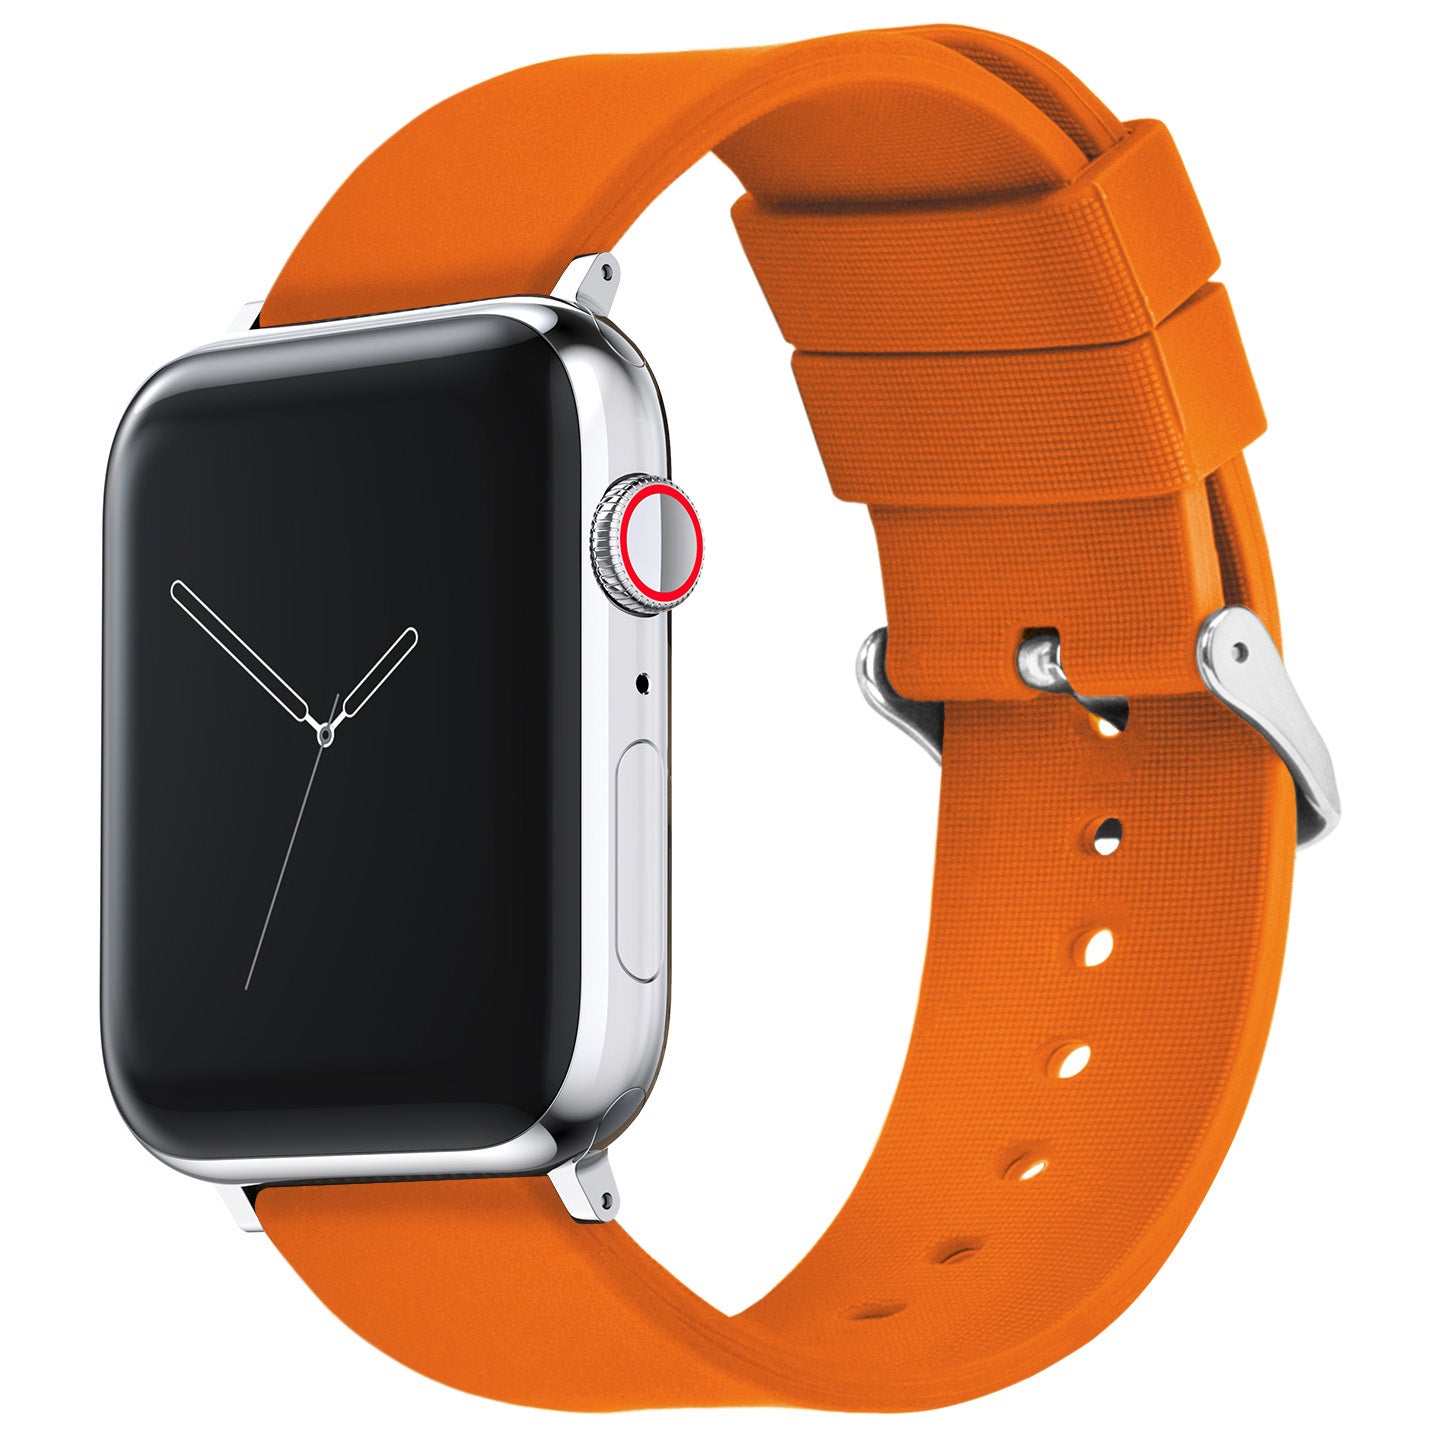 Hermes Style Watch Bands for Apple Watches